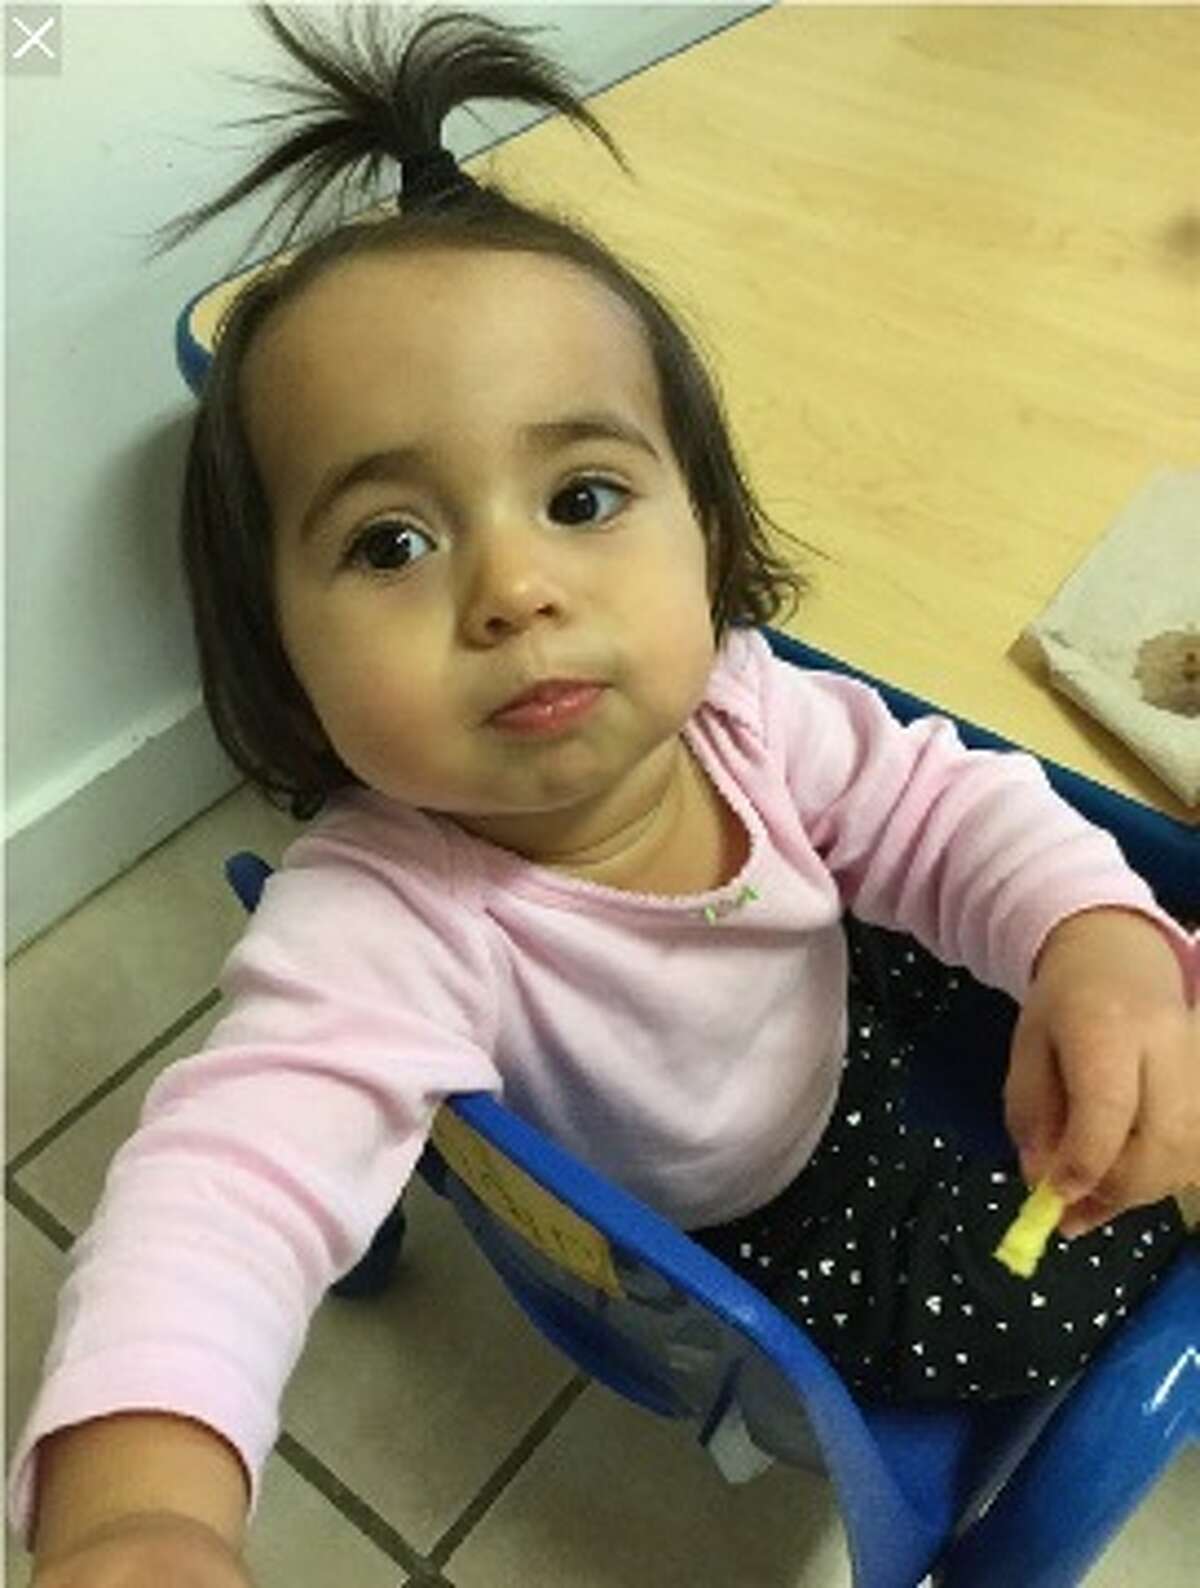 Vanessa Morales, who turned four Sept. 7, has been missing since Dec. 2, 2019, when her mother Christine Holloway was discovered bludgeoned to death in a Myrtle Street home, according to Ansonia police.